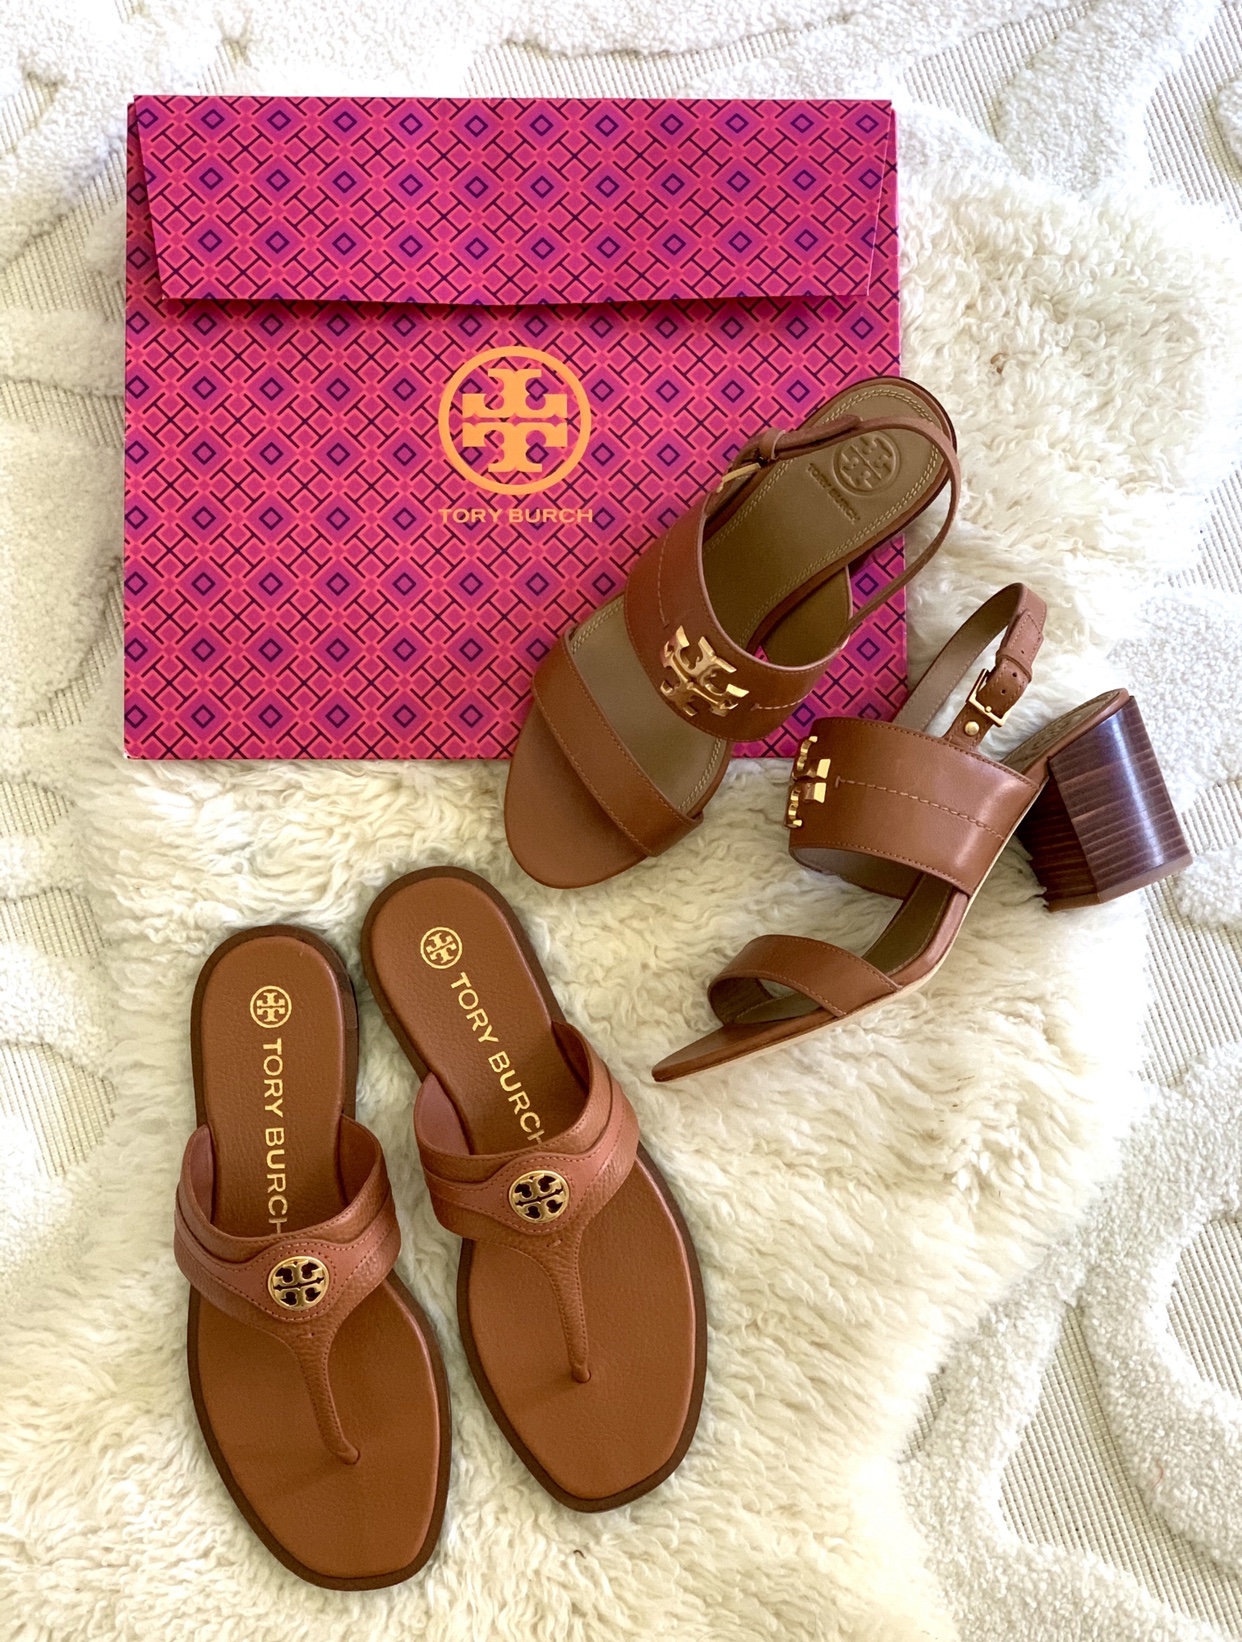 Tory Burch Secret Flash Sale - 1 Day Only! - The Double Take Girls